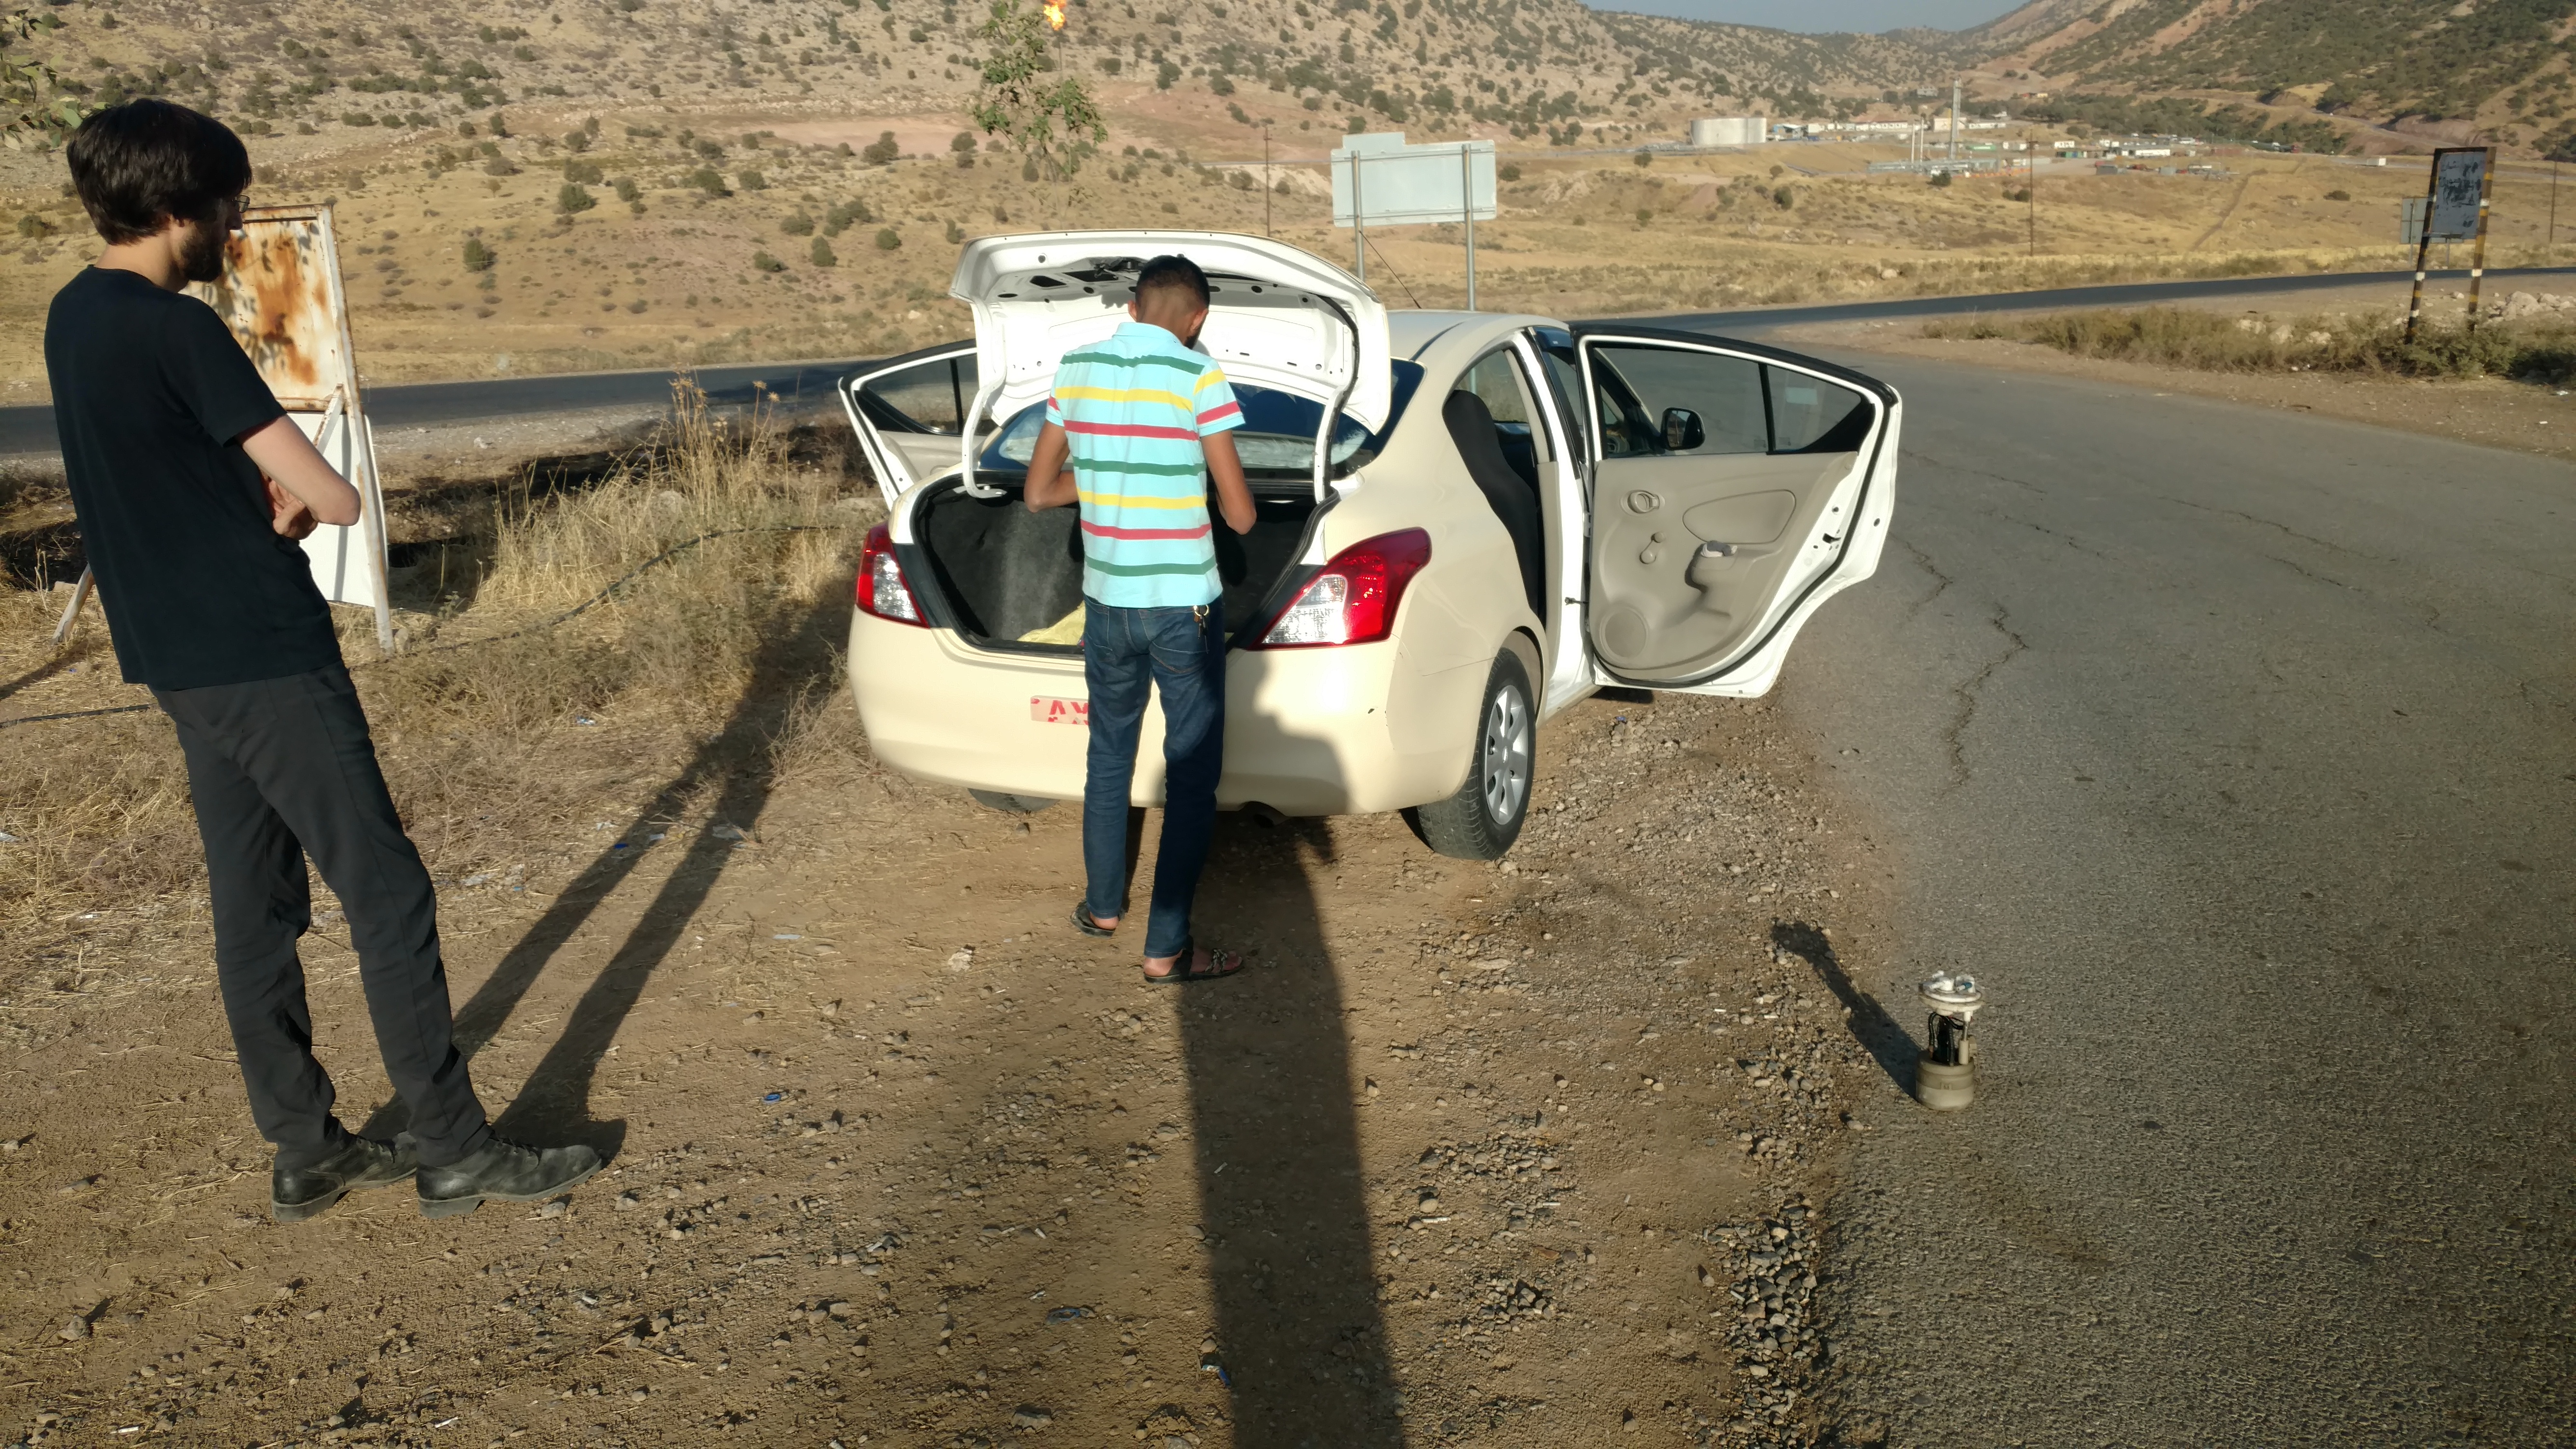 Our car broke down on the way to Lalish